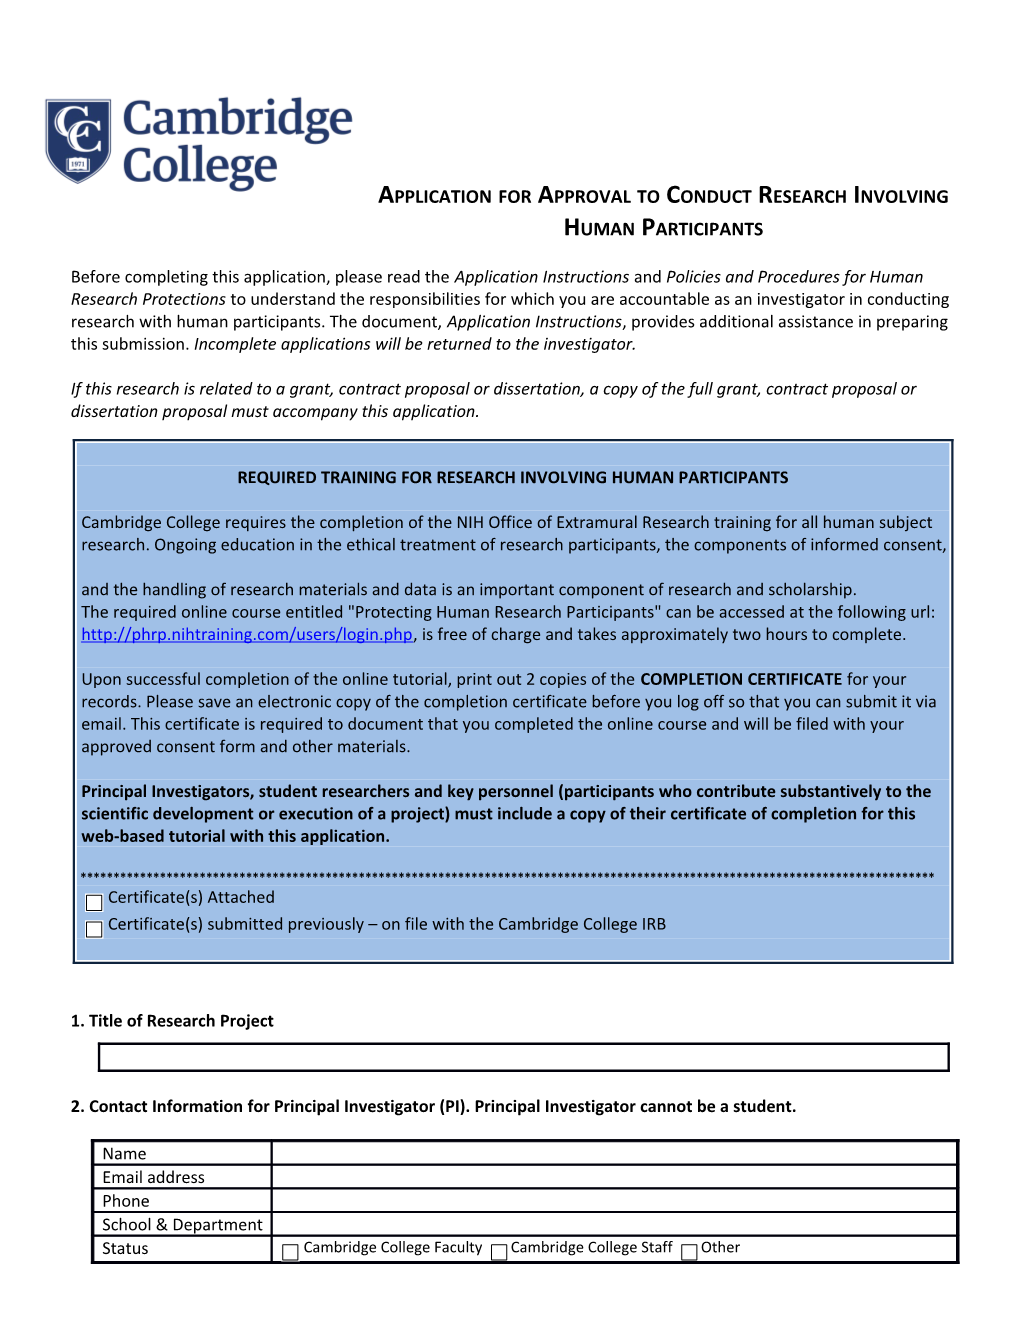 Application for Approval to Conduct Research Involving Human Participants